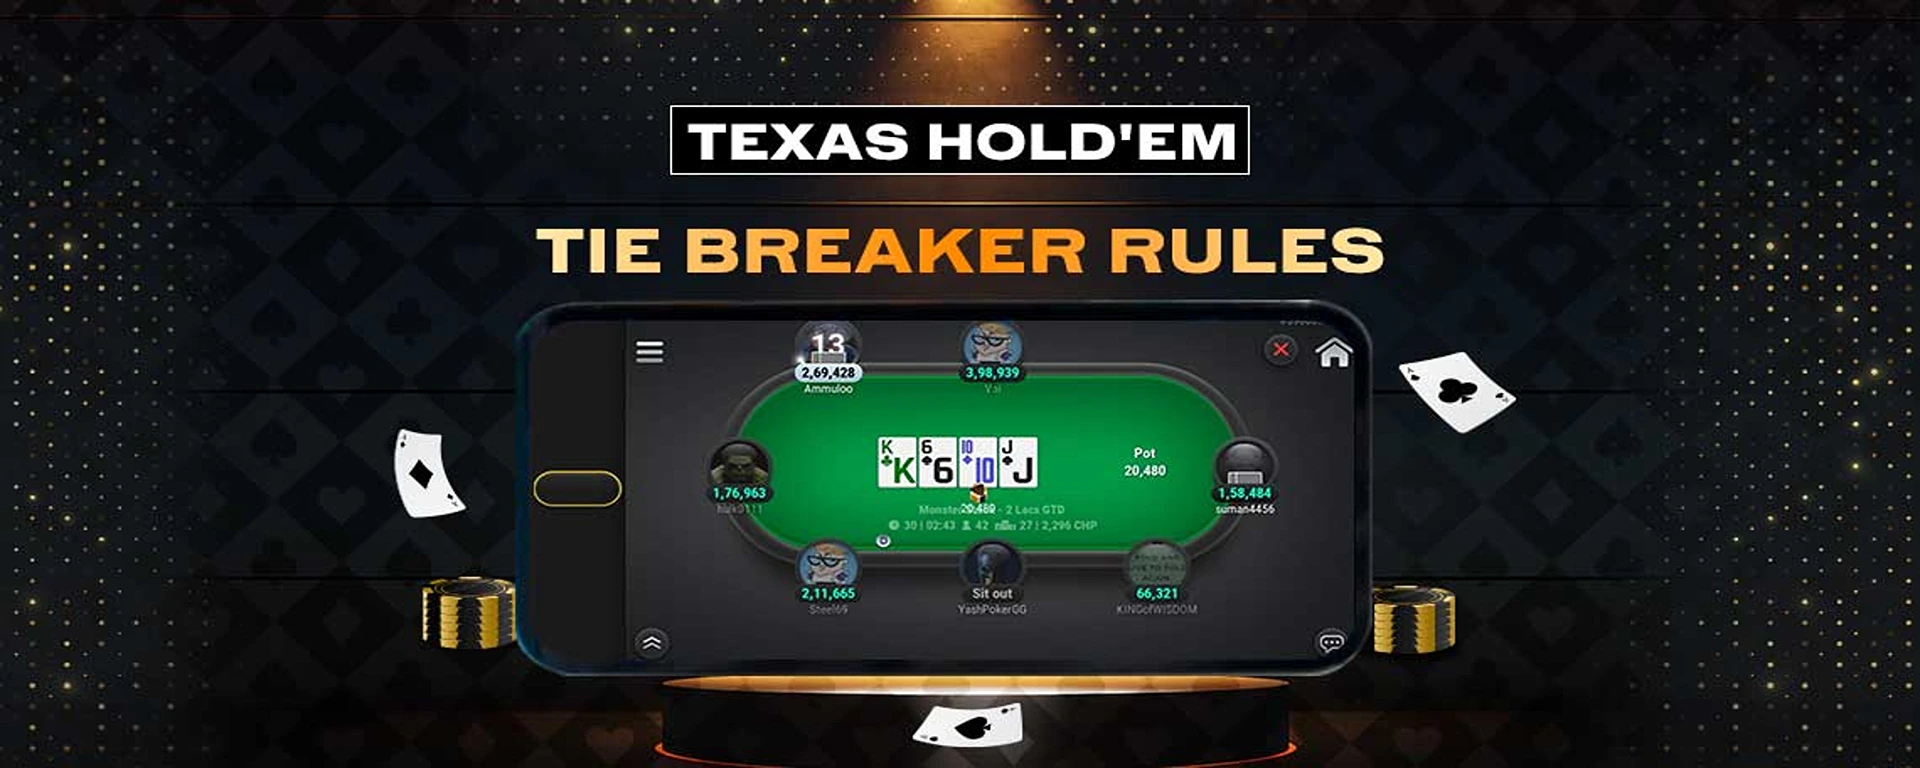 Texas Hold’em Tie Breaker Rules You Should Be Aware Of